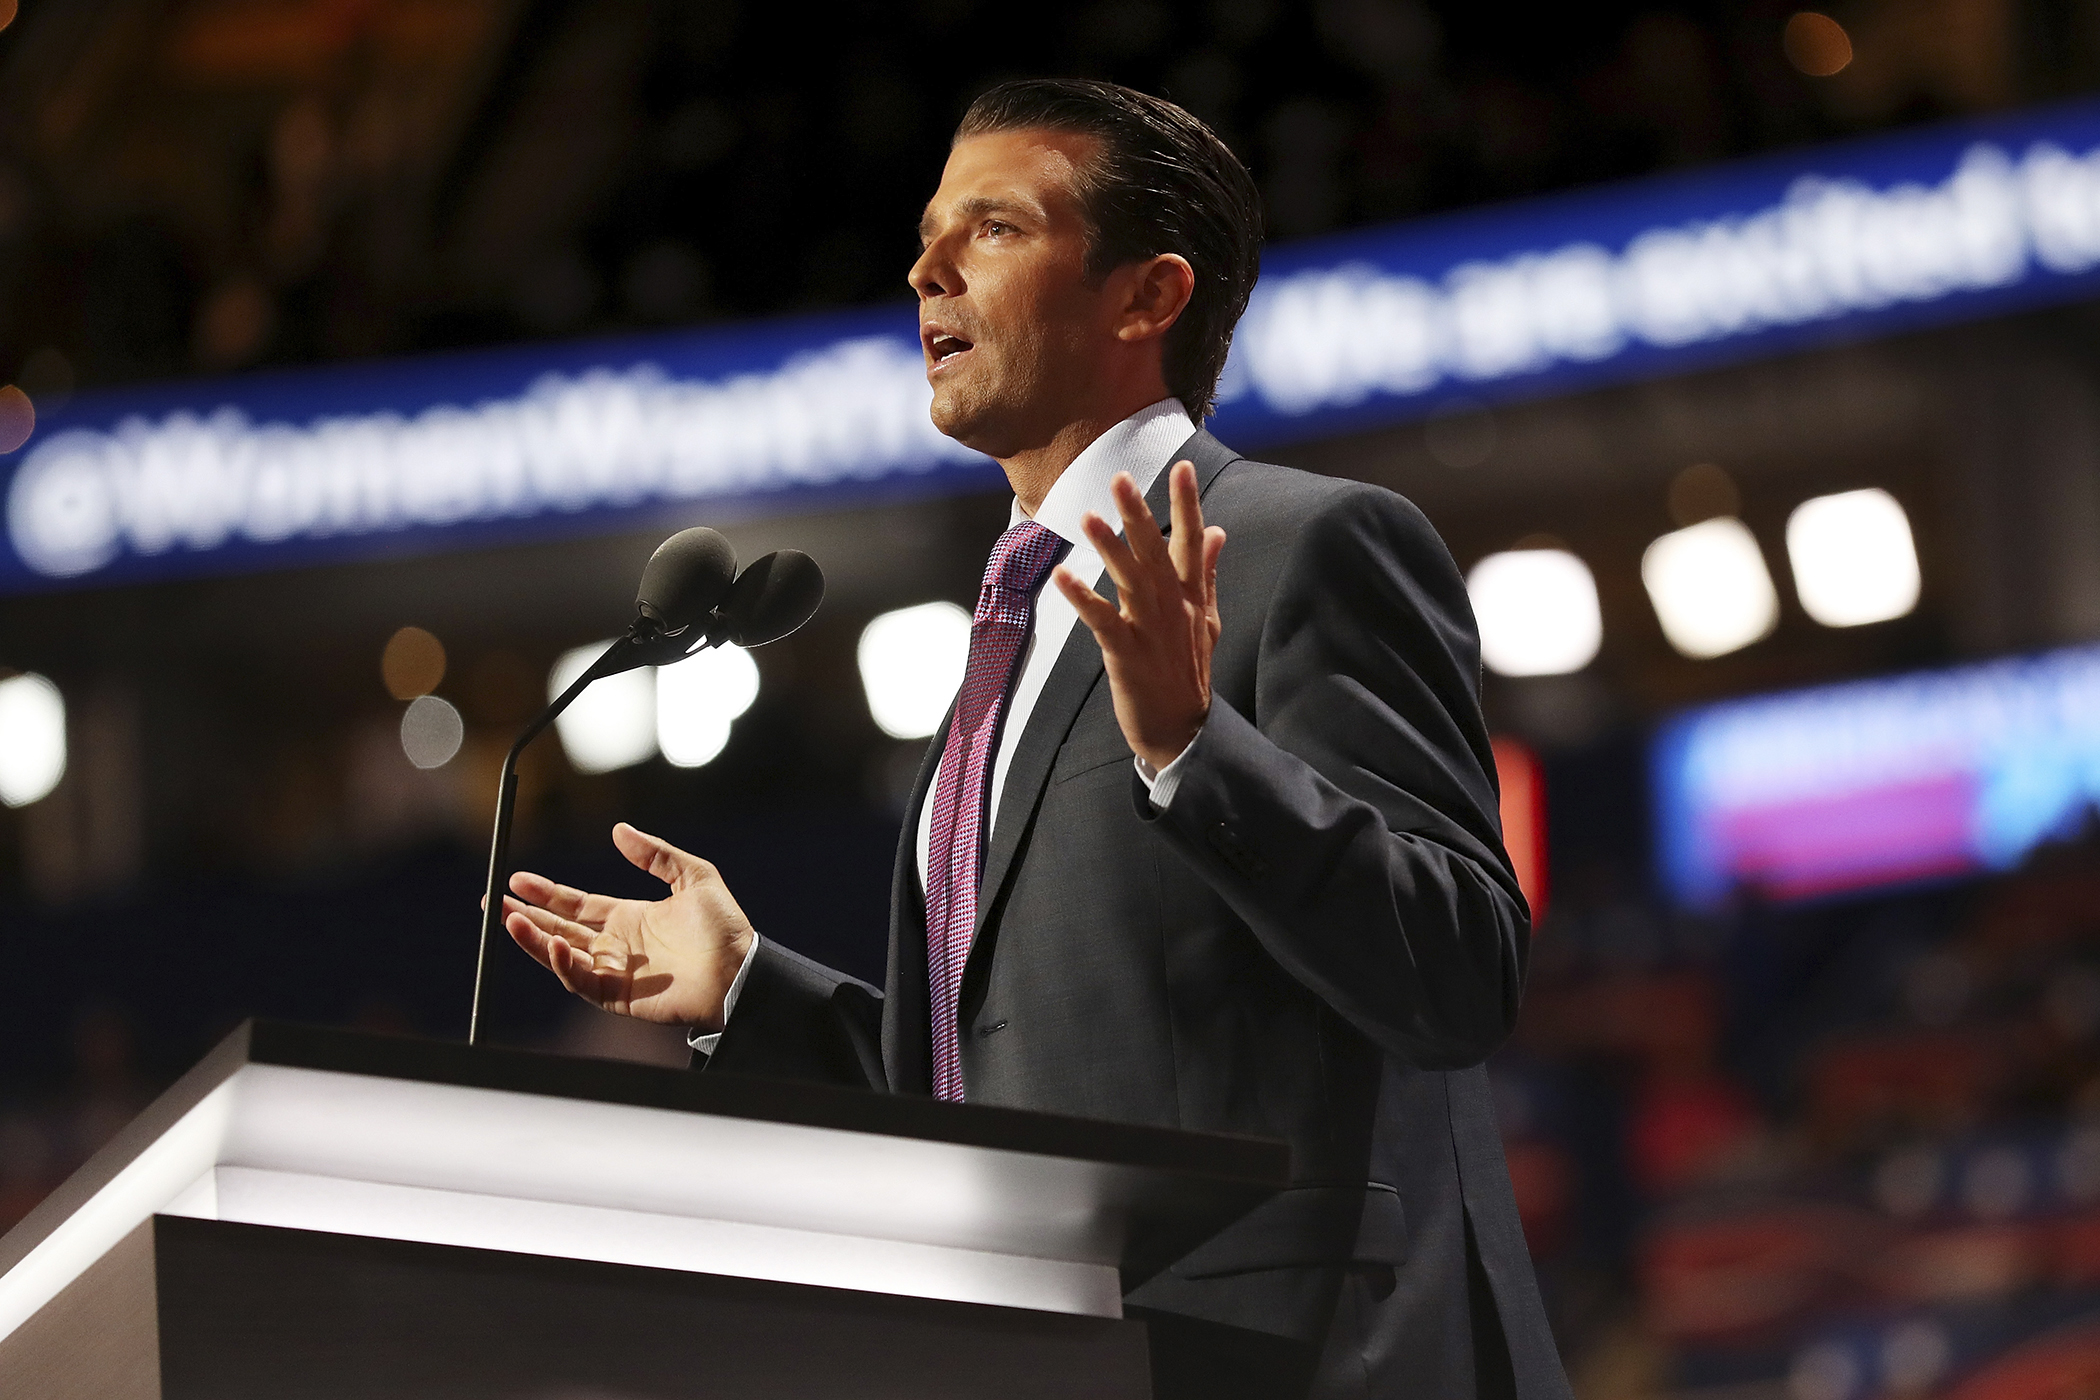 Donald Trump Jr. denouncing Dodd-Frank regulations on banks at the GOP convention Tuesday night. (John Moore&mdash;Getty Images)